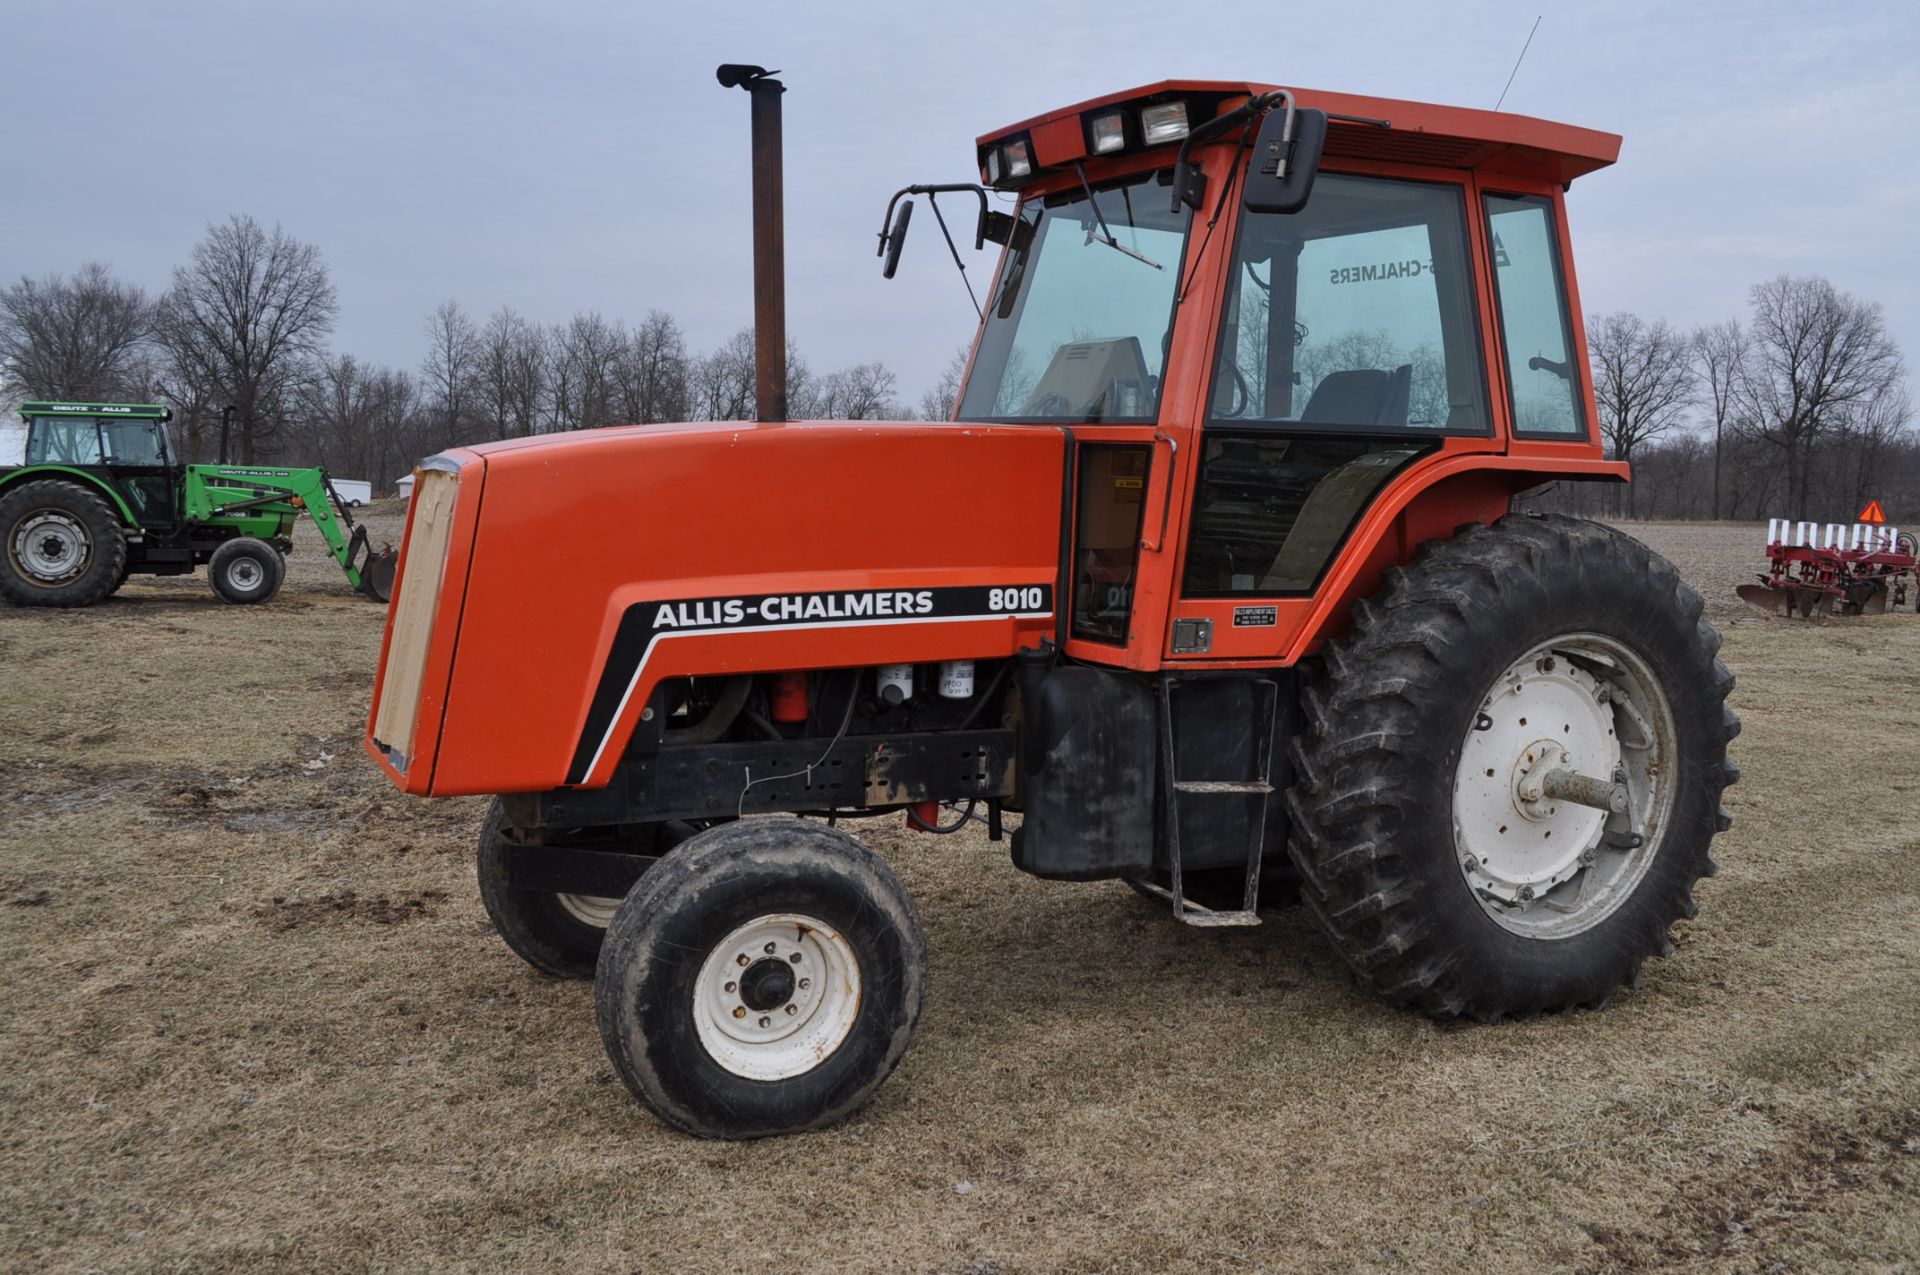 1982 Allis Chalmers 8010 tractor, power direct 20 spd, CHA, 2 remotes,540/1000 PTO, 3pt, 18.4 x 38